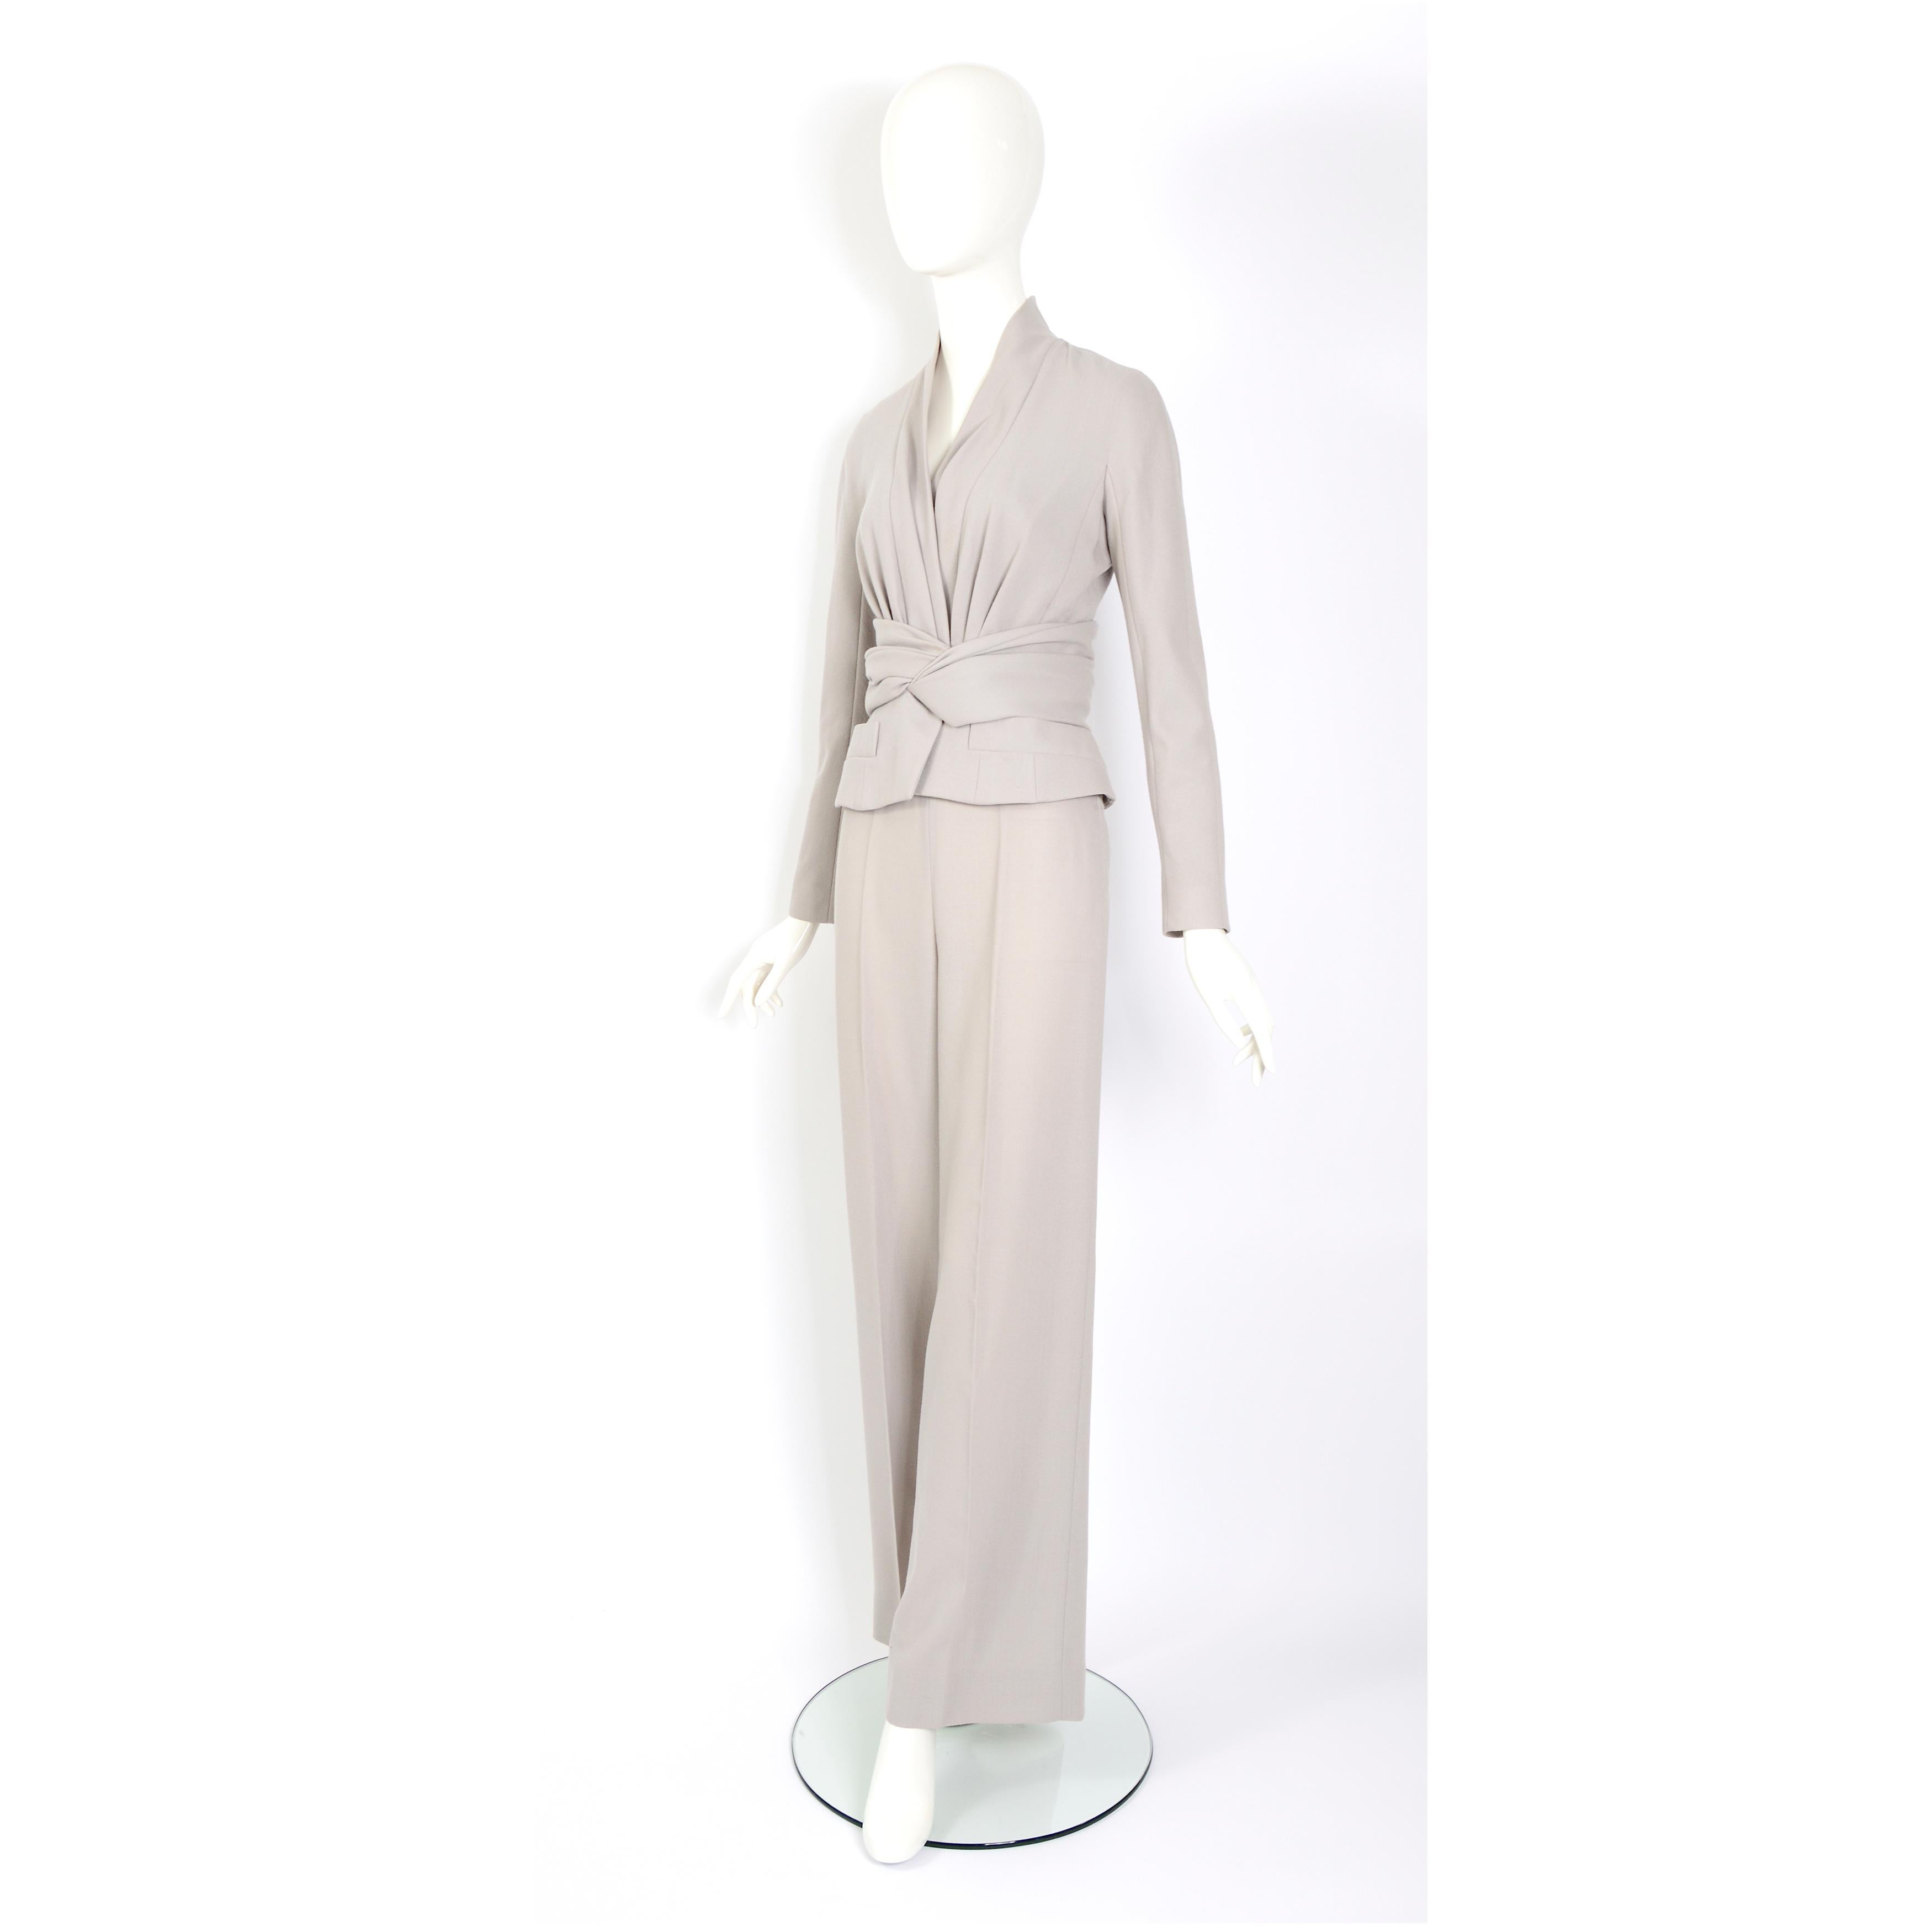 Christian Dior by John Galliano vintage 2008 ready to wear suit In Excellent Condition For Sale In Antwerp, BE